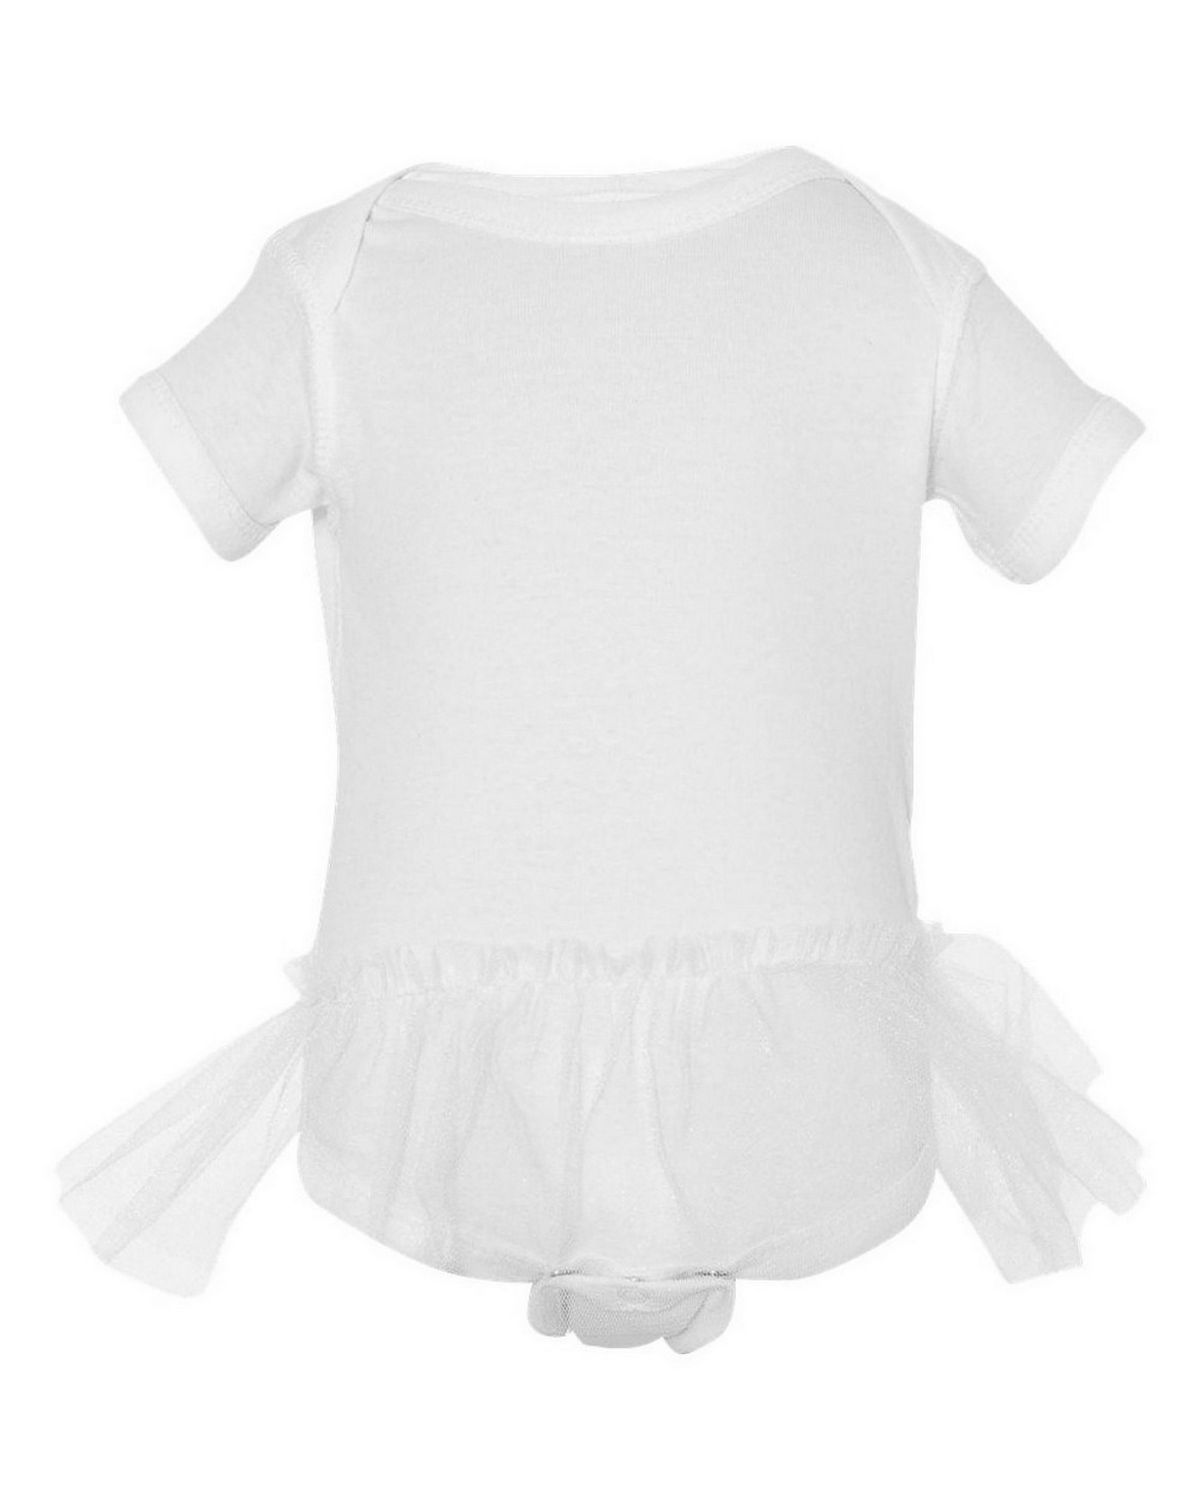 Details about   Infant  Cheerleader Dress  size 5/6T   Assorted Colors   Rabbit Skins 